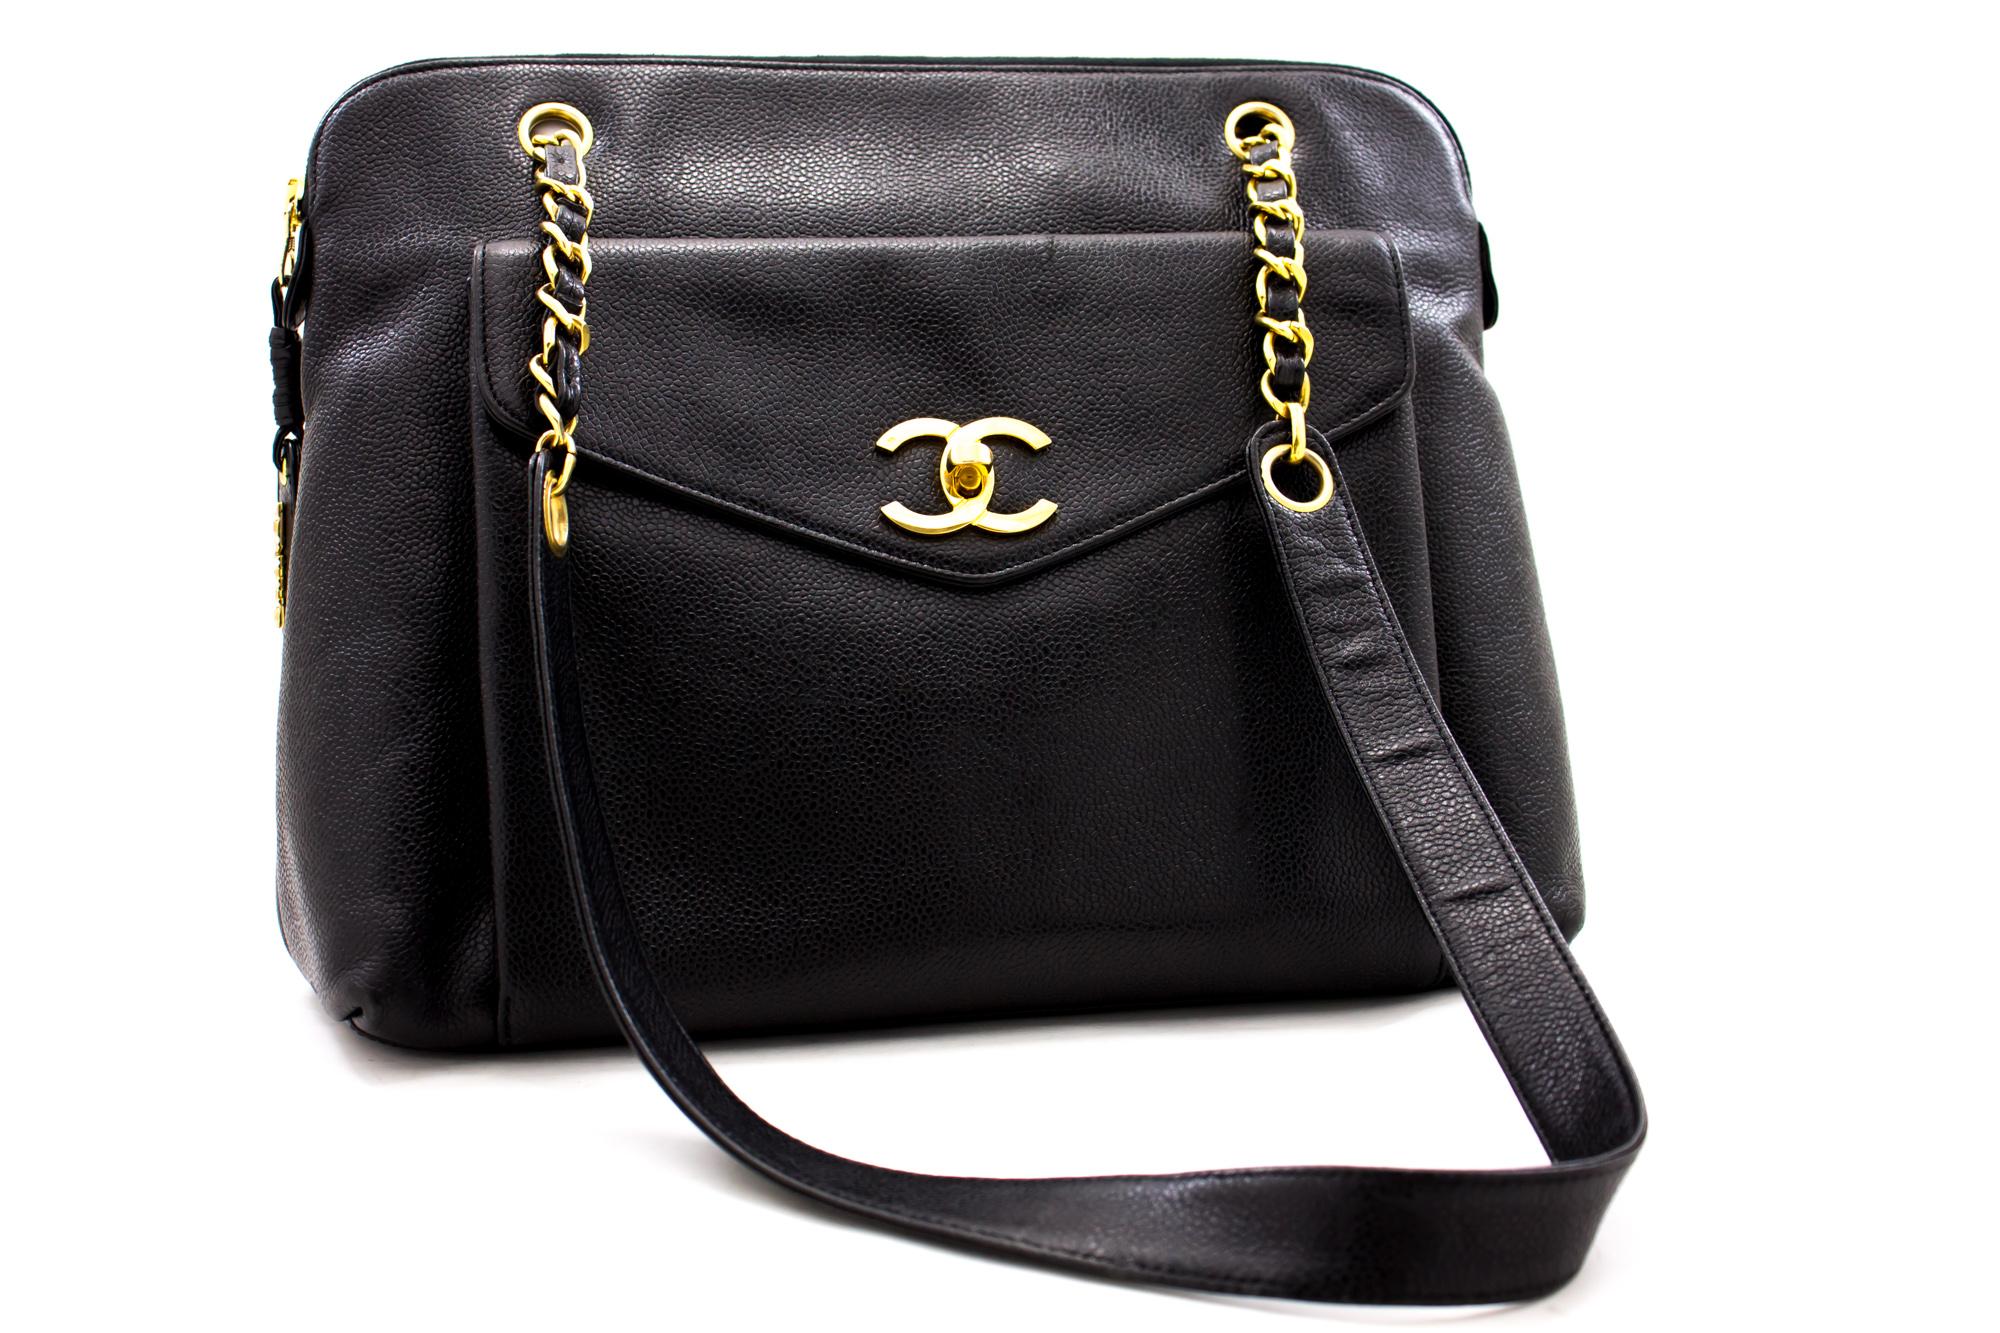 An authentic CHANEL Caviar Large Chain Shoulder Bag Black Leather Gold Hardware. The color is Black. The outside material is Leather. The pattern is Solid. This item is Vintage / Classic. The year of manufacture would be 1994-1996.
Conditions &